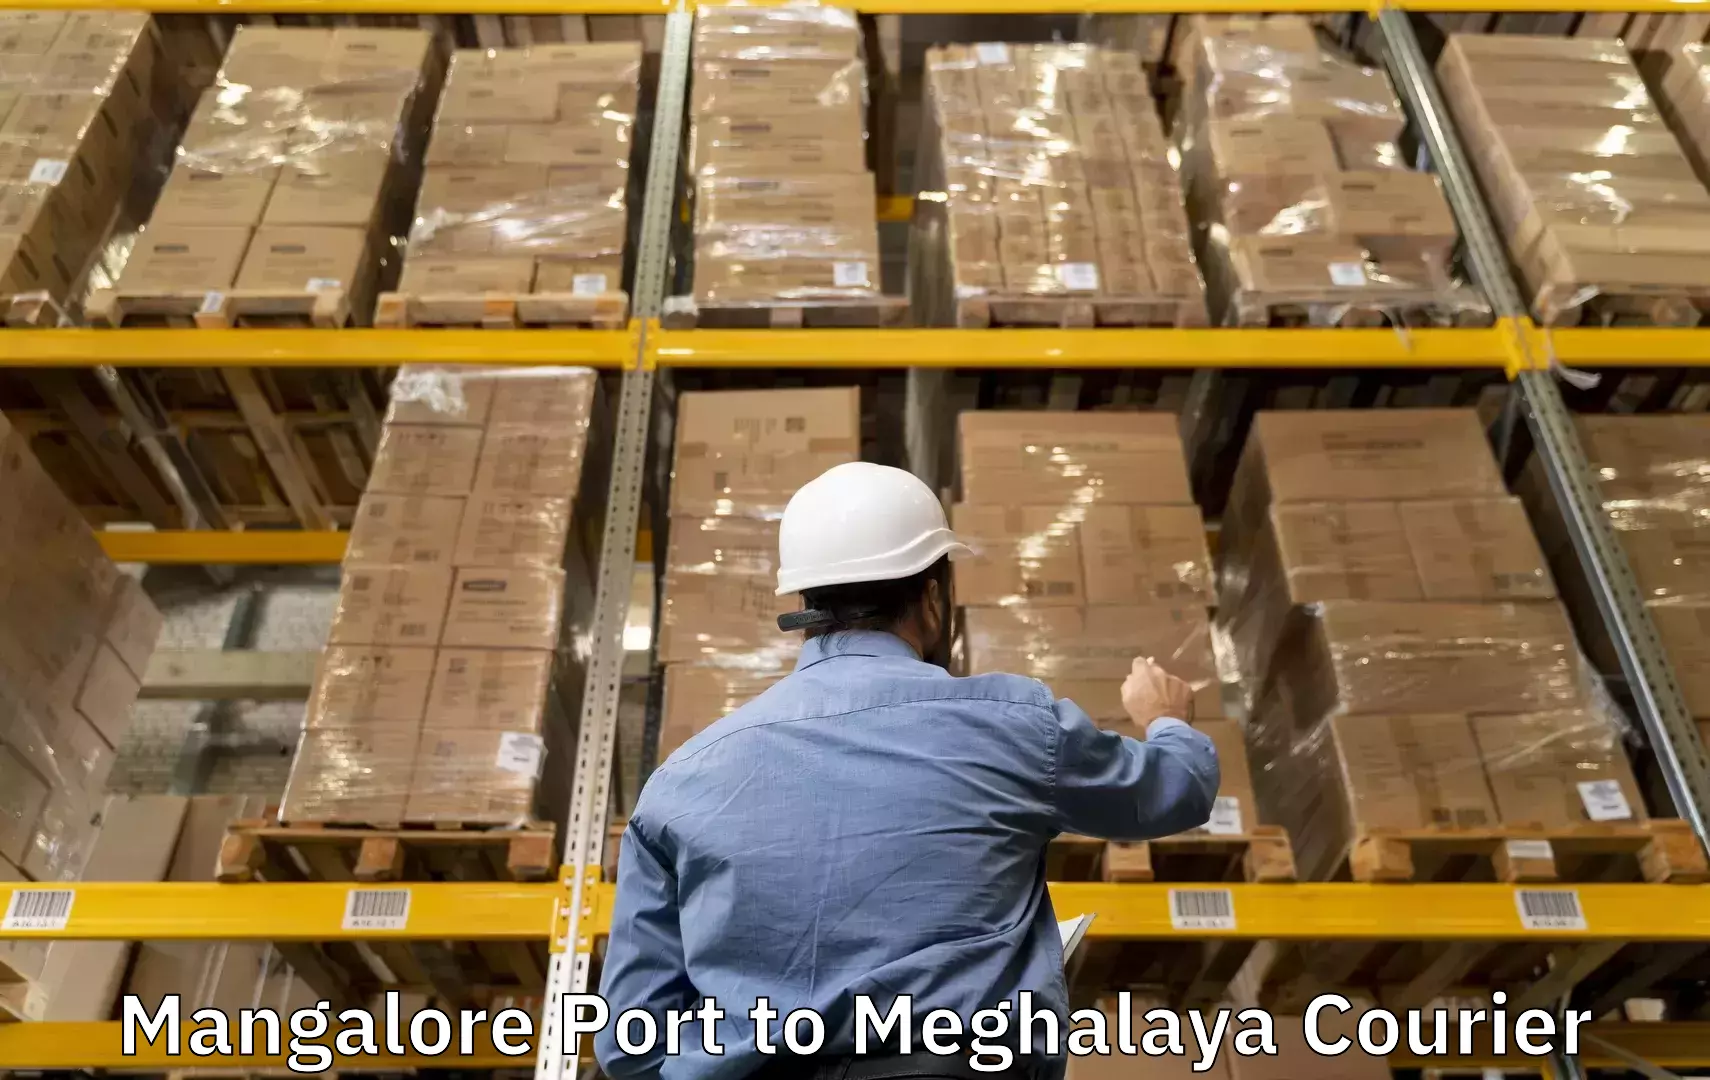 Luggage transport service Mangalore Port to Nongstoin